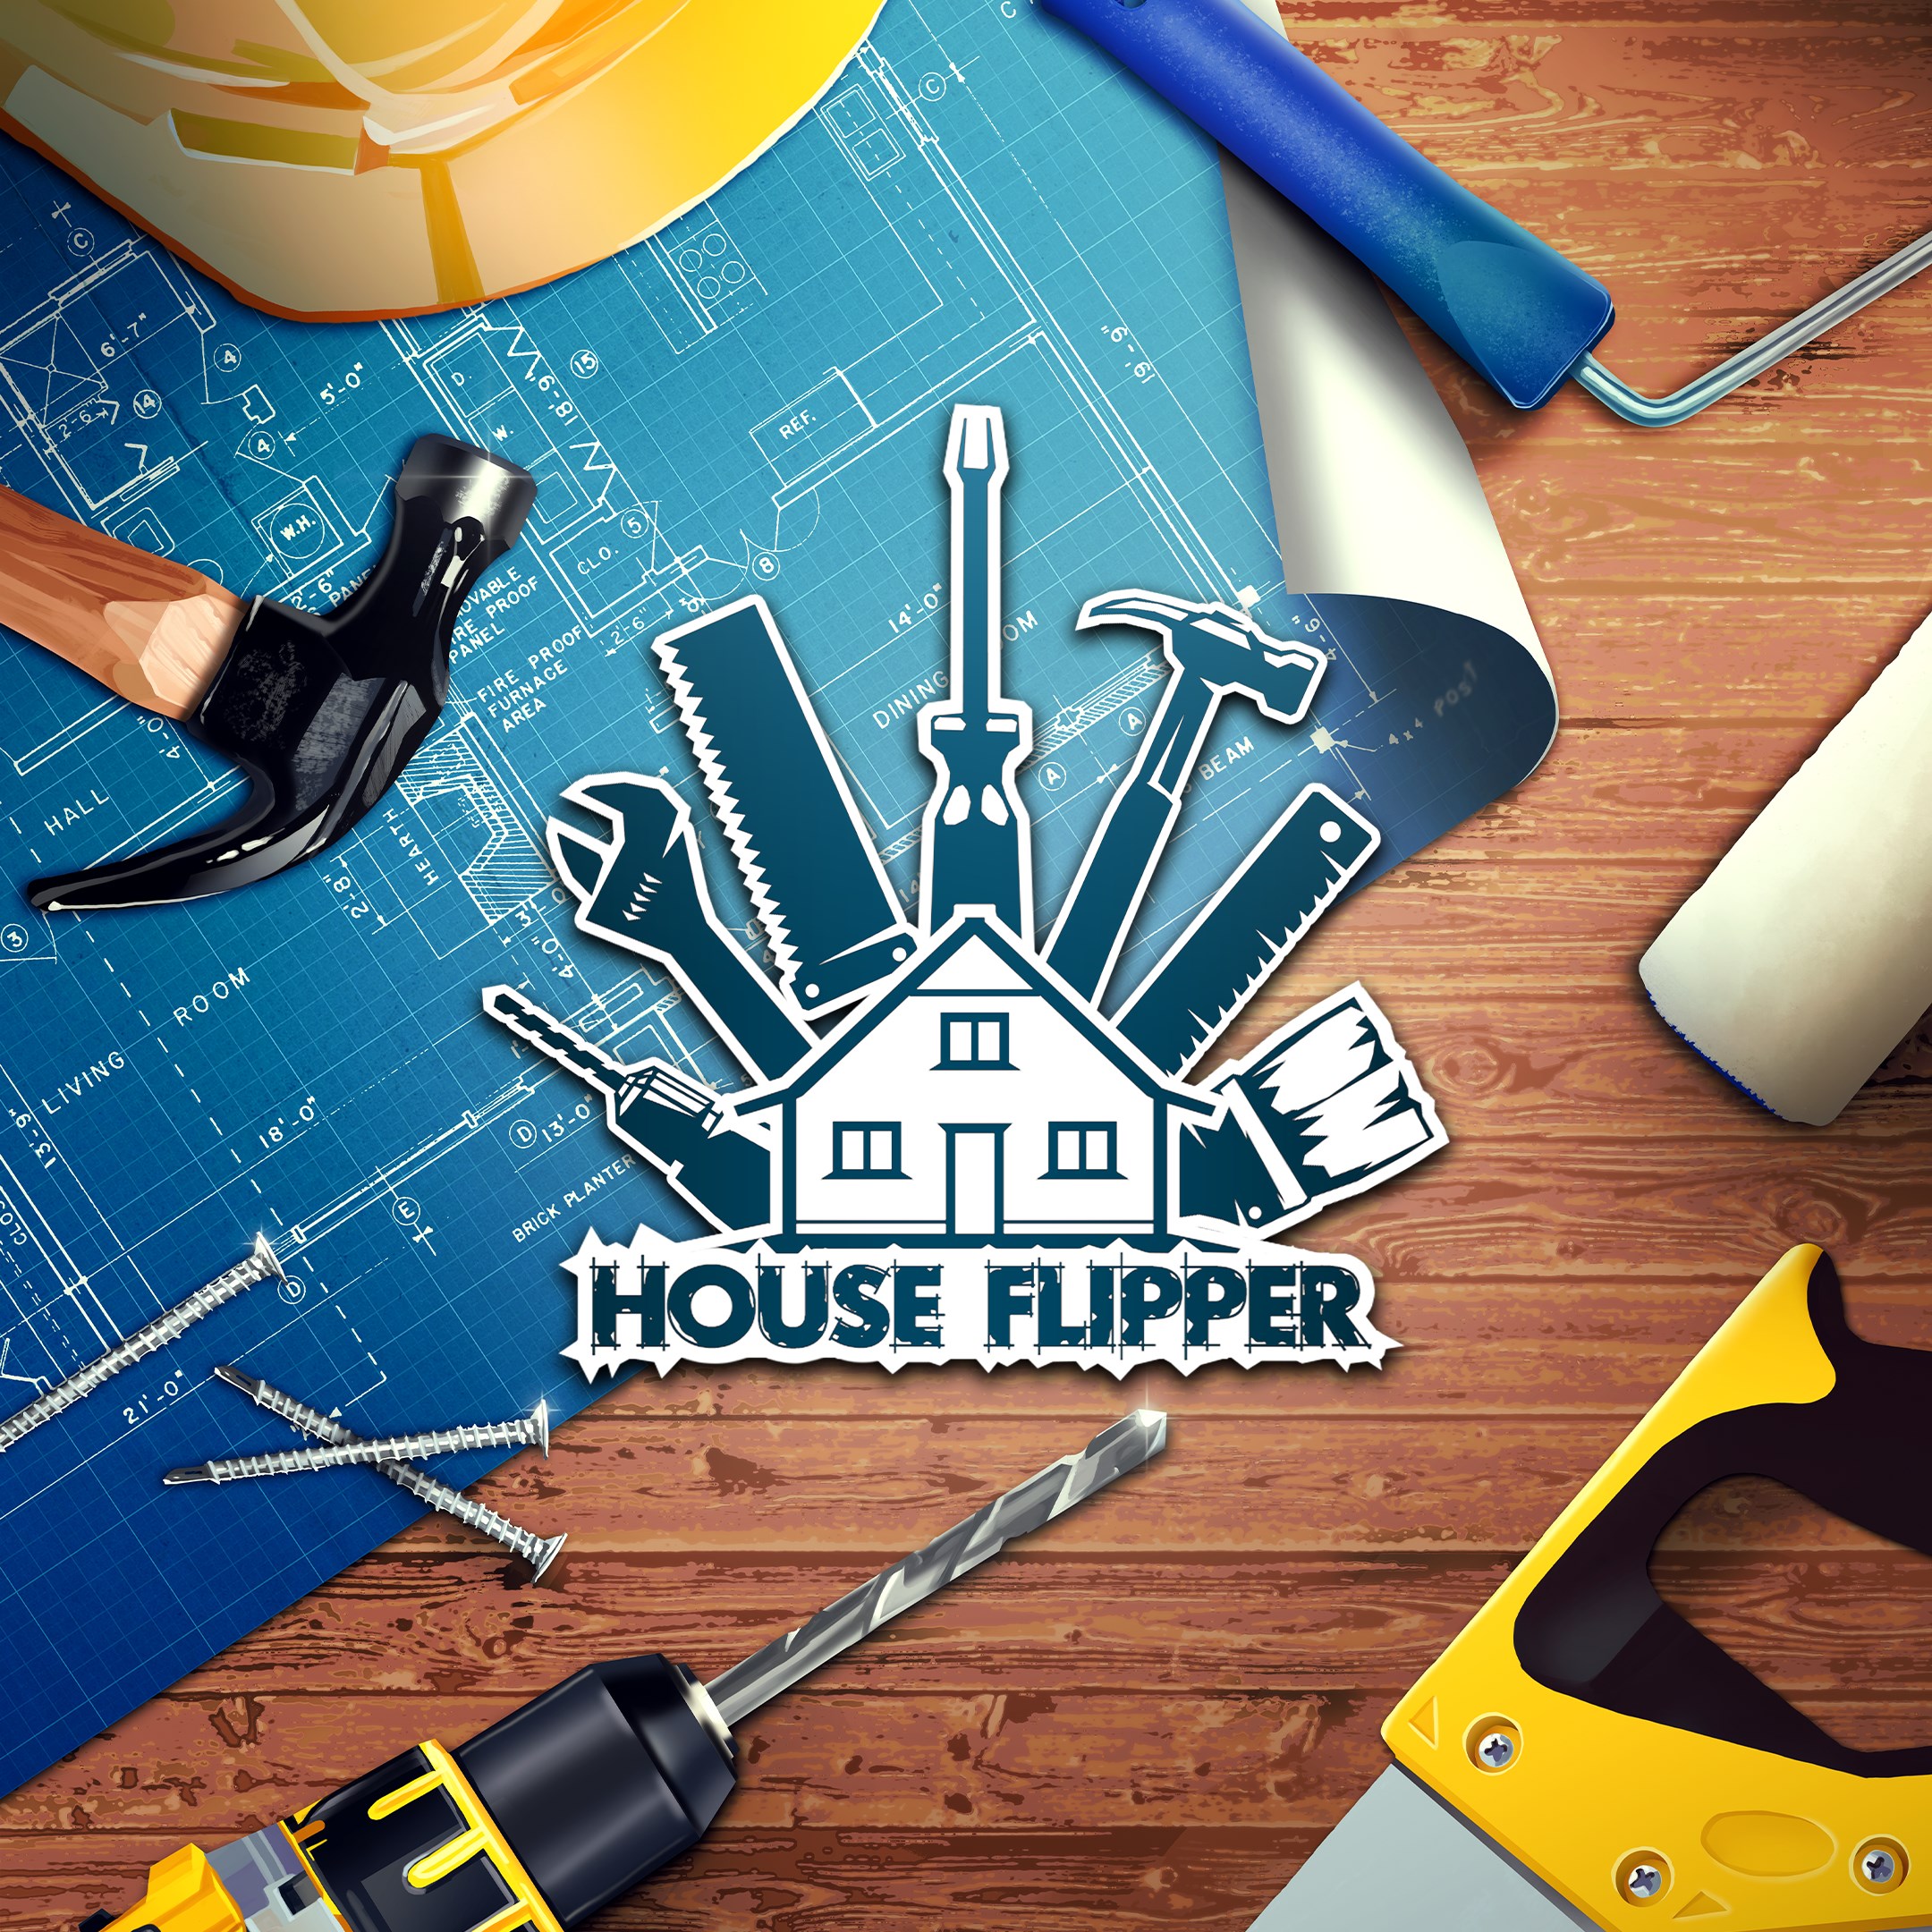 House Flipper download the new